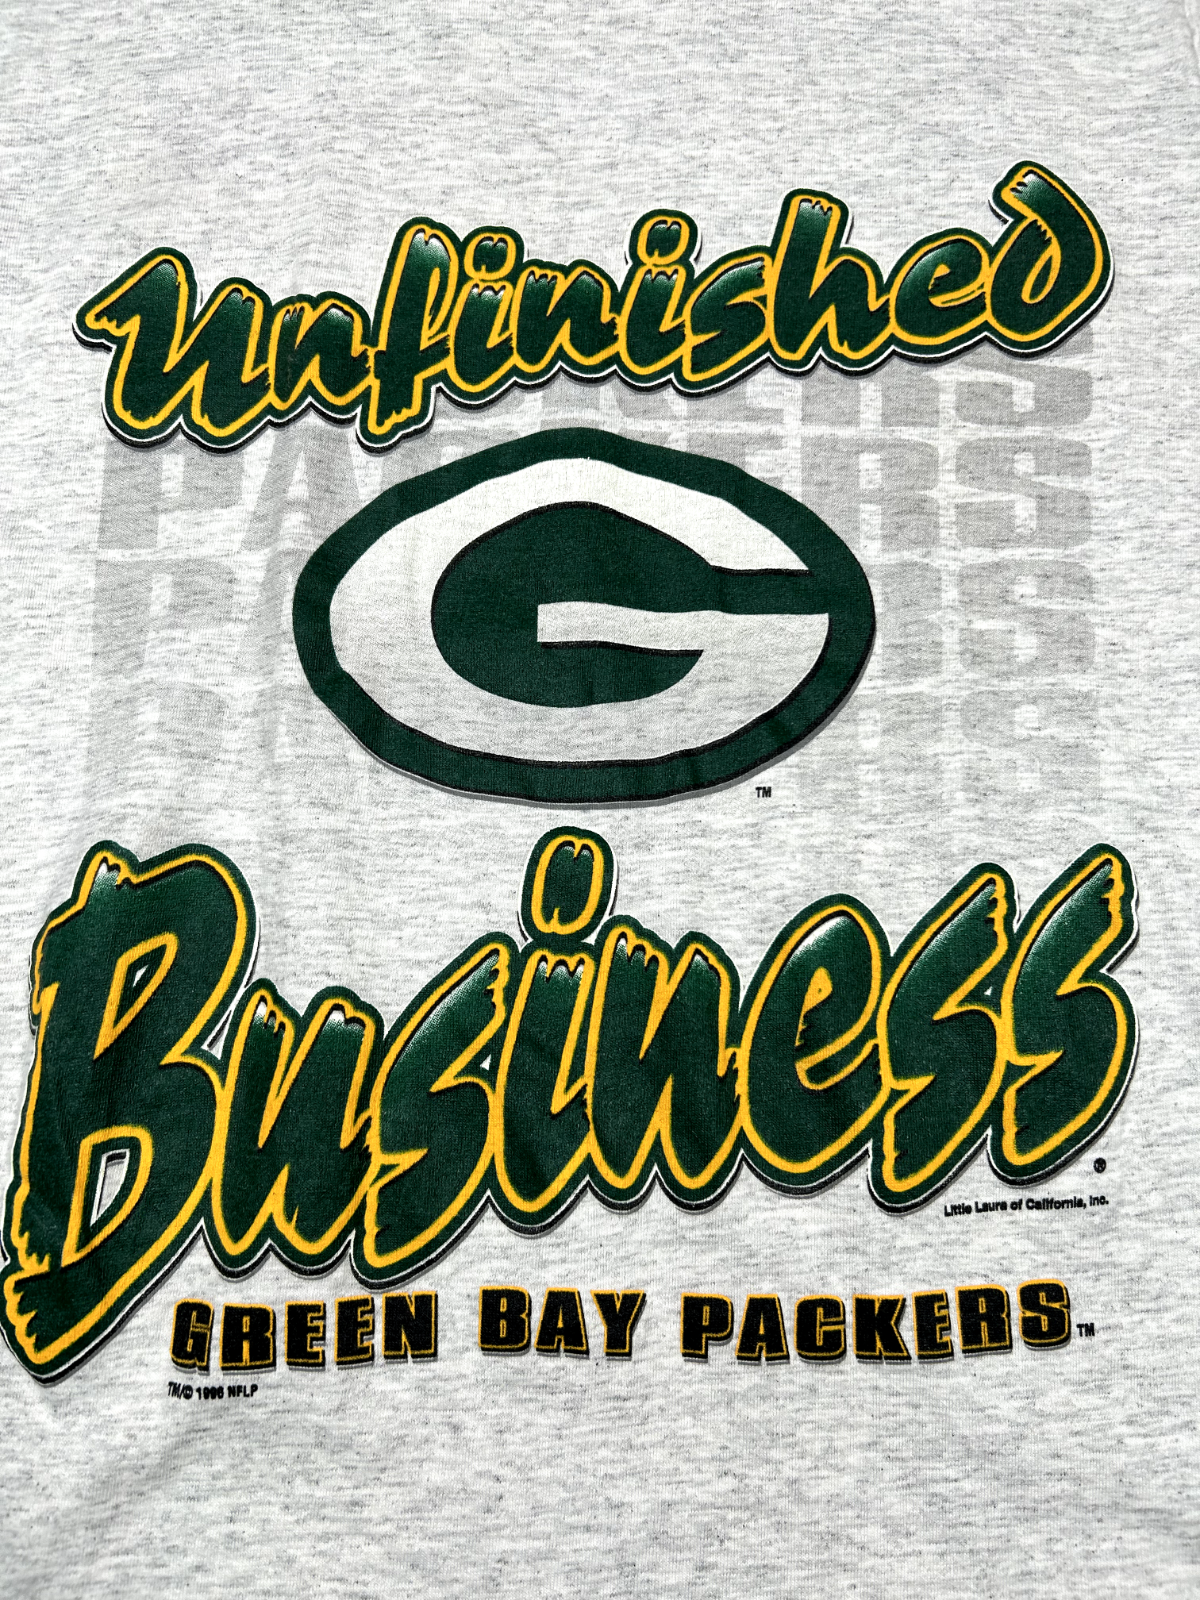 Vintage 1996 Green Bay Packers Unfinished Business NFL Graphic T-Shirt Sz Large